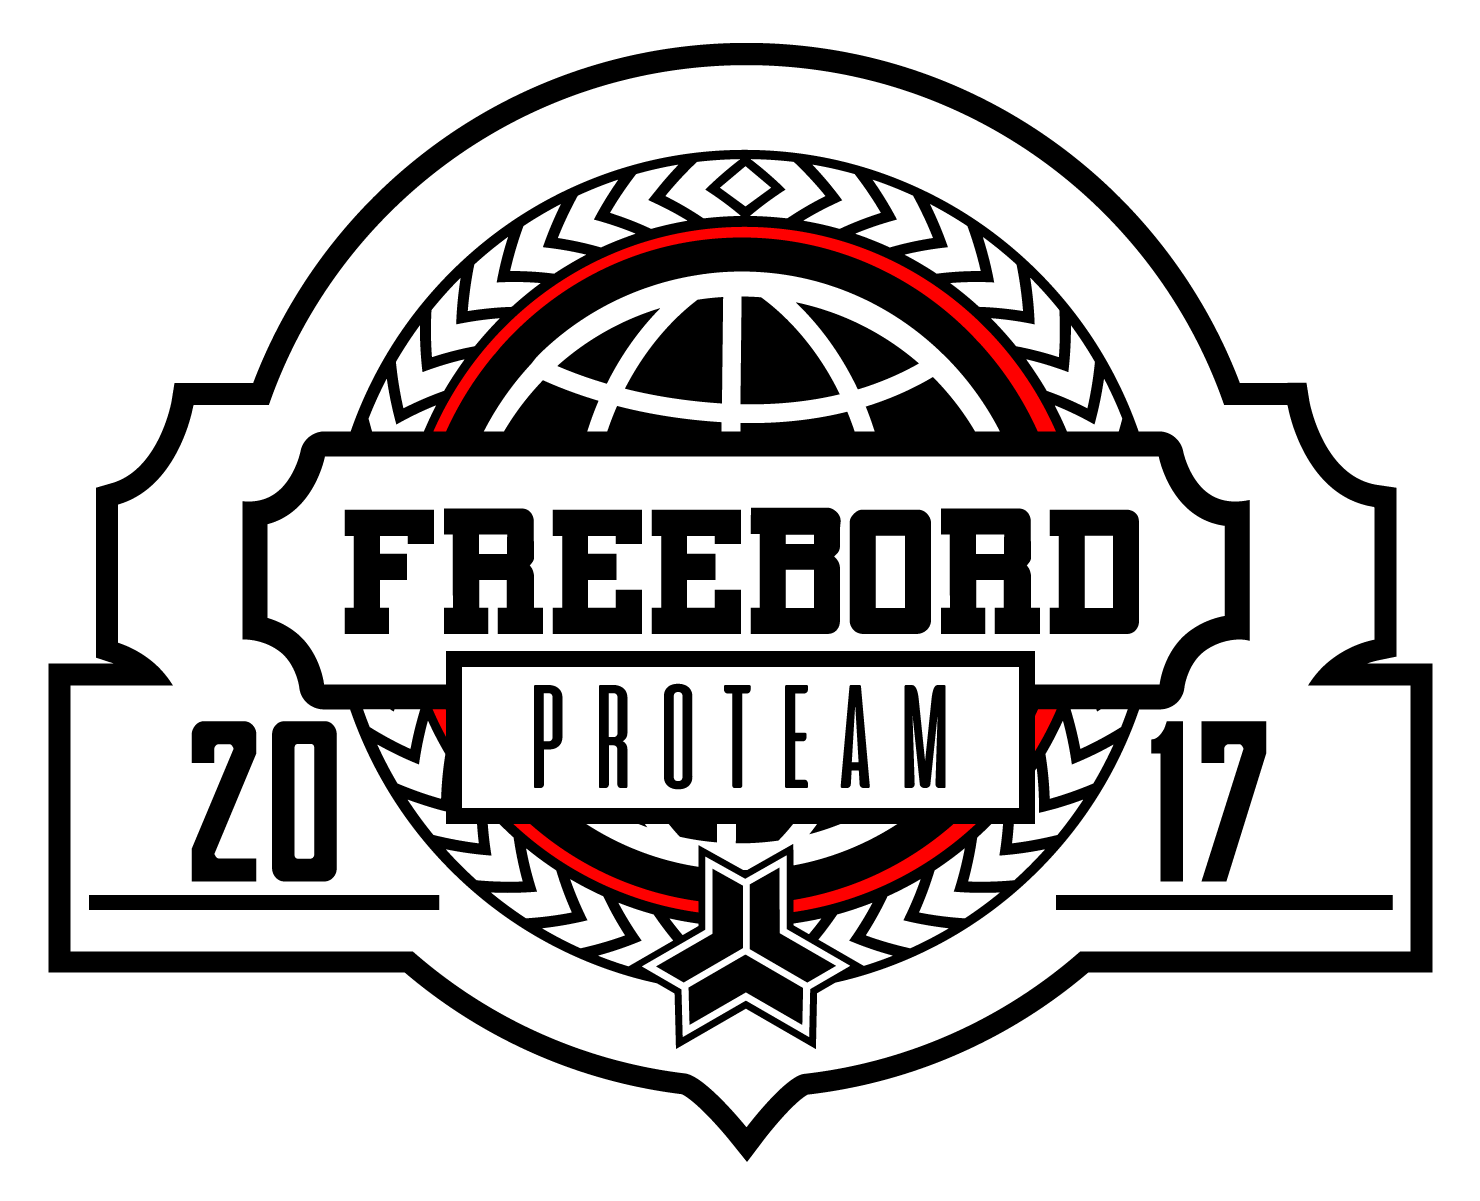 Introducing The Official 2017 Freebord Pro Team